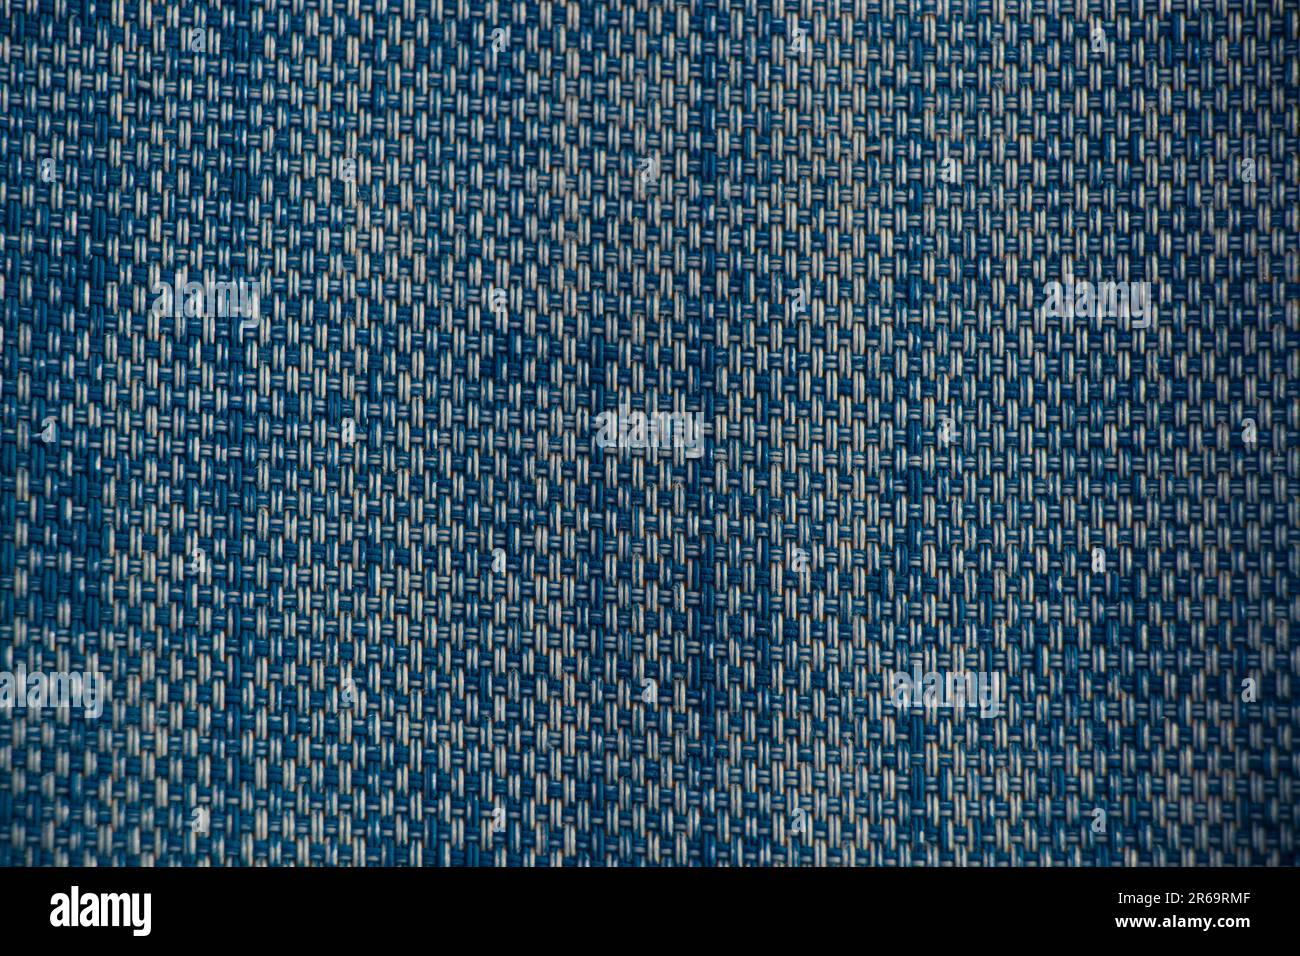 dark blue fabric as a background closeup old Stock Photo